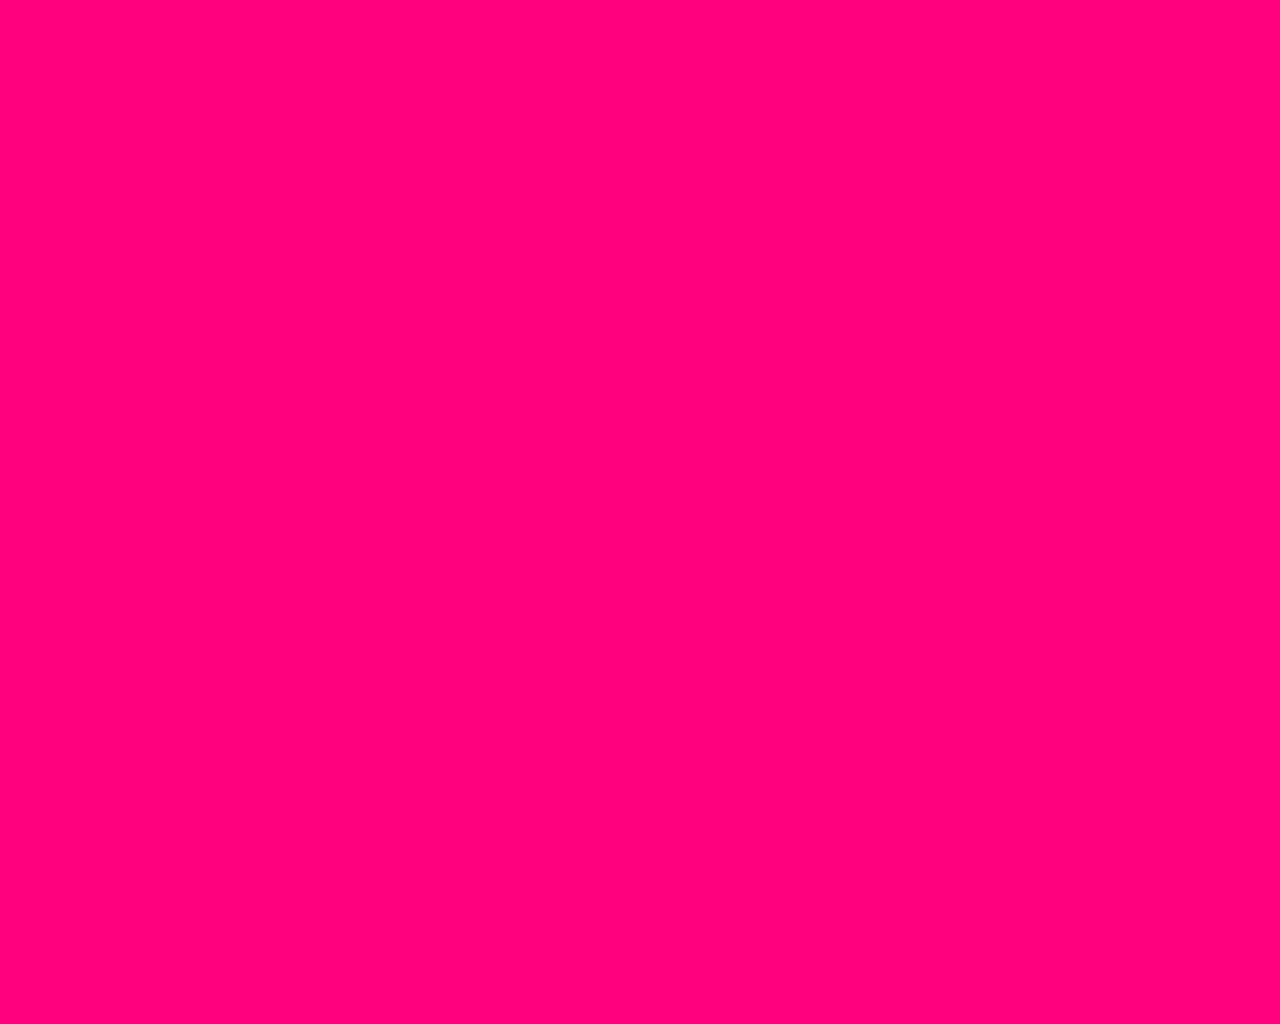 Bright Pink Background Image Amp Pictures Becuo